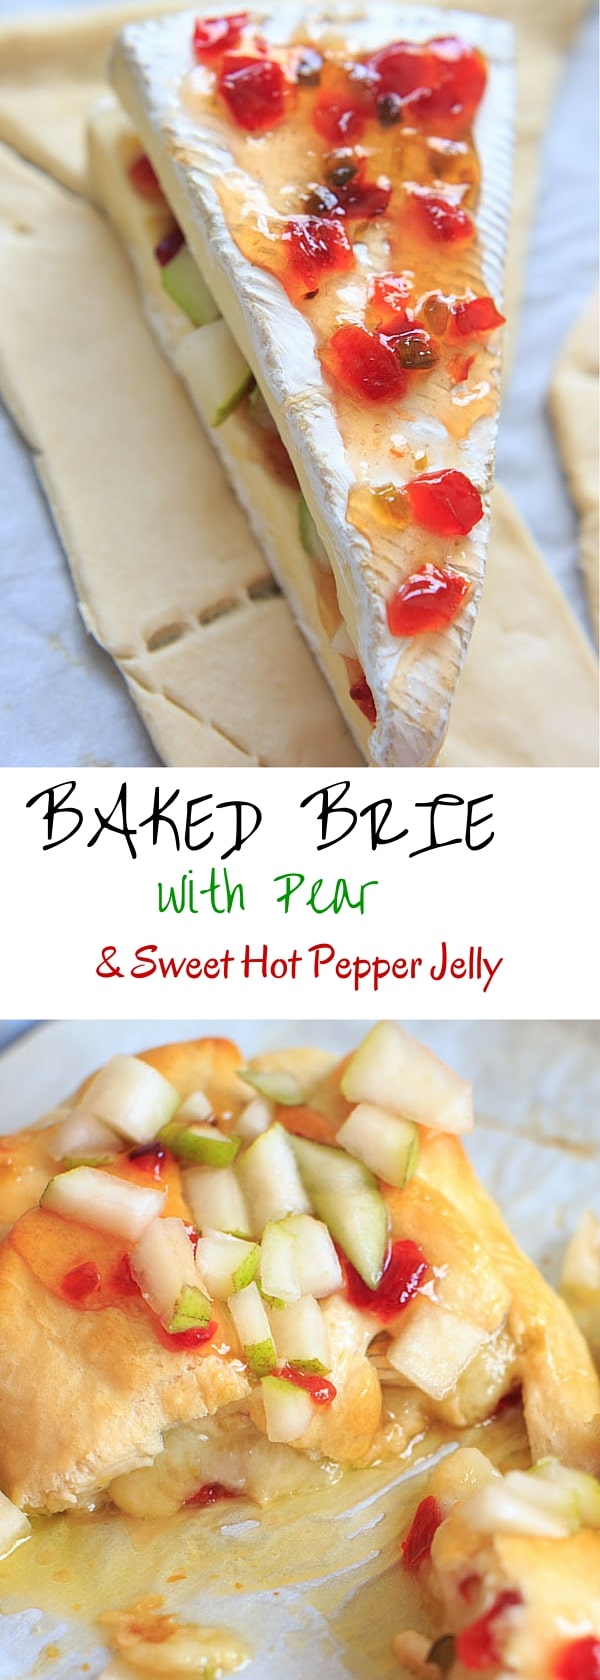 Baked Brie with Sweet Hot Pepper Jelly and Pear Appetizer